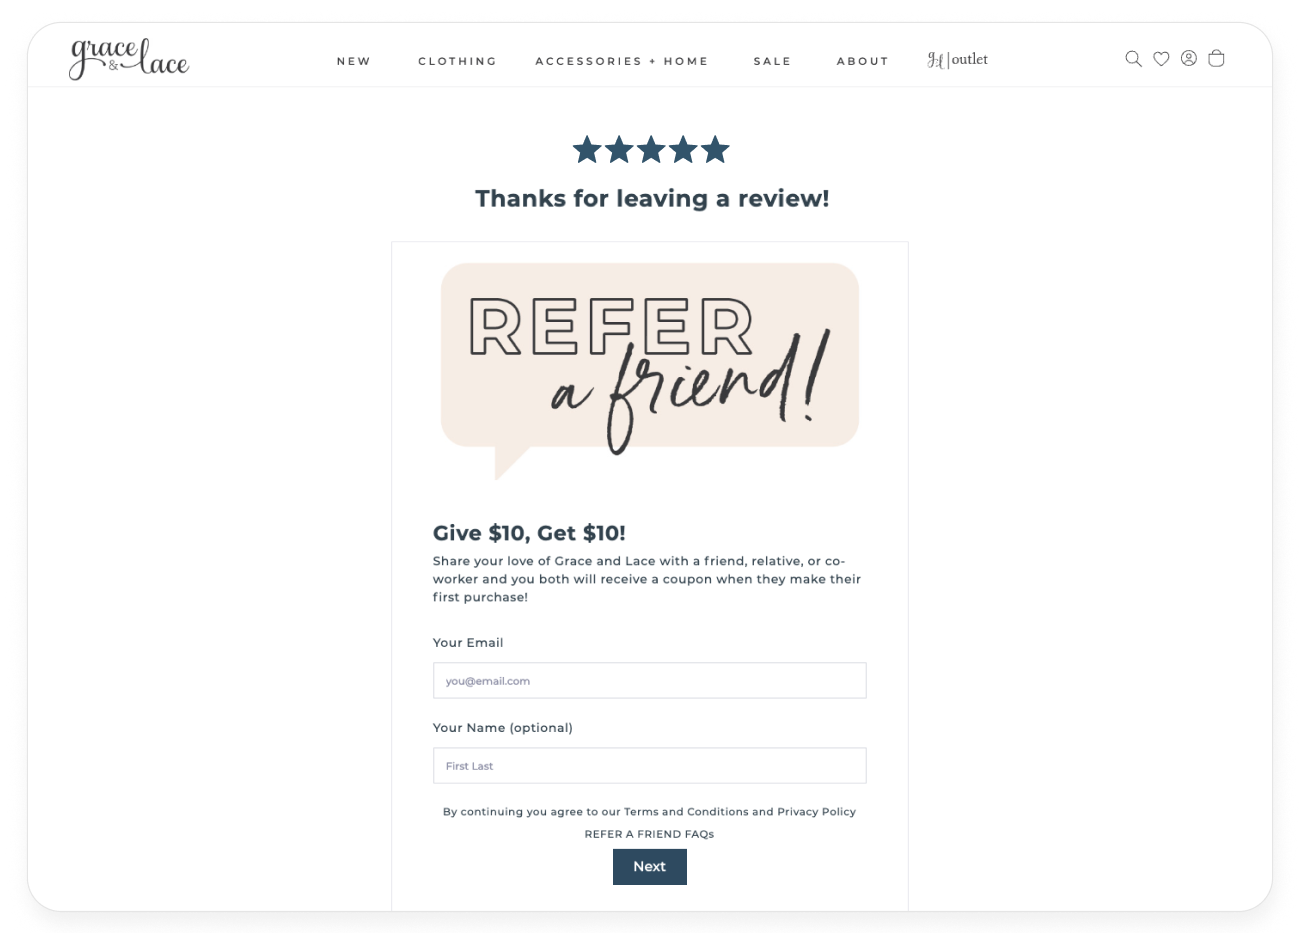 Grace and Lace referral program